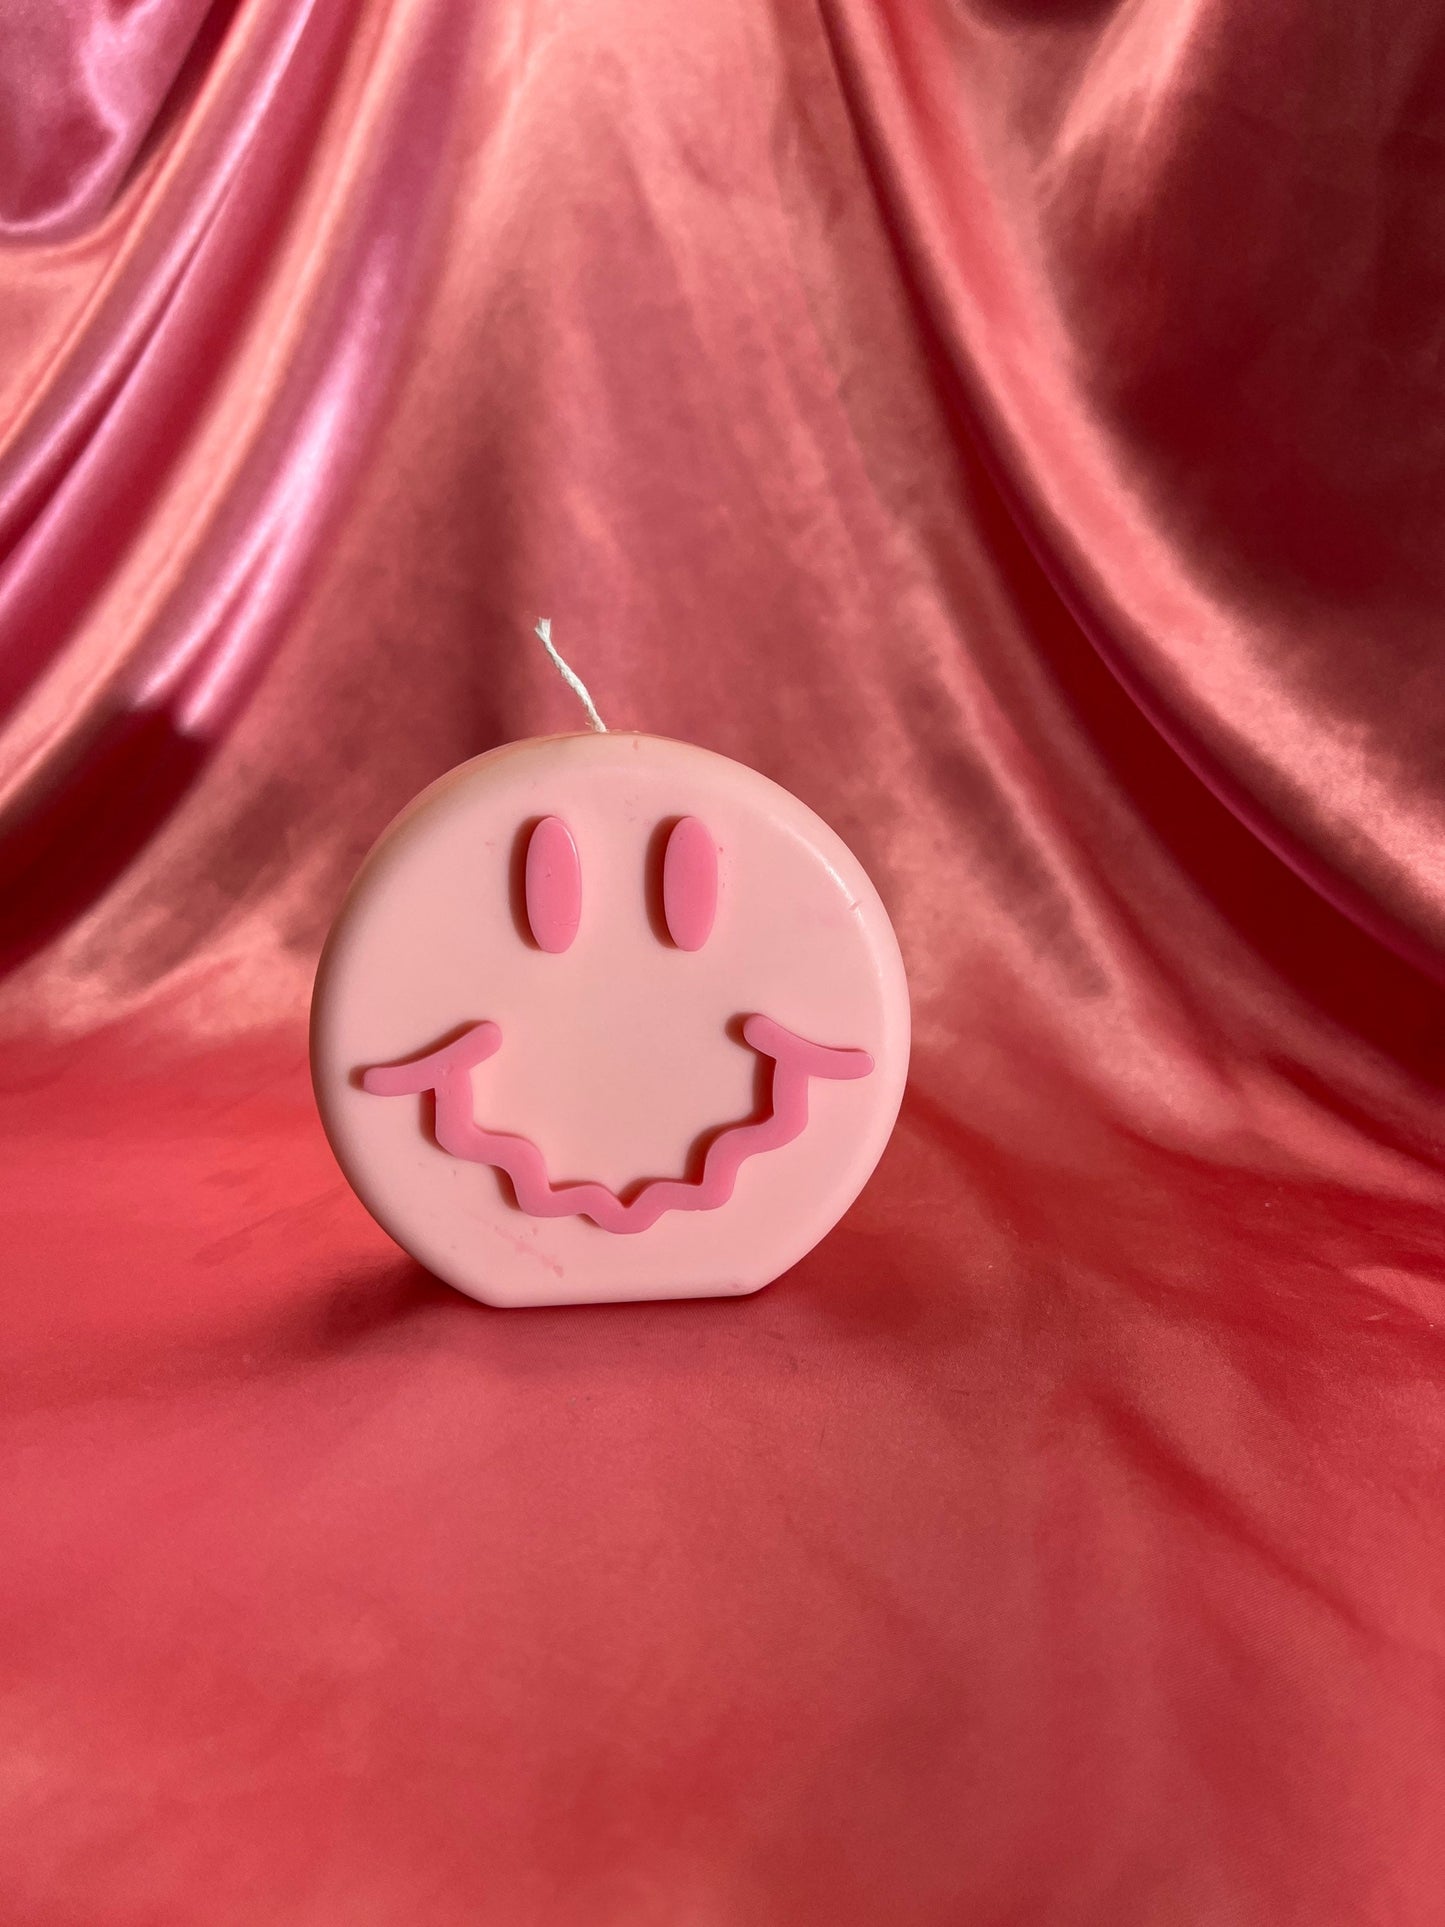 Psychedelic Smiley - Large Two Toned Squiggly Smiley Face Aesthetic Candle